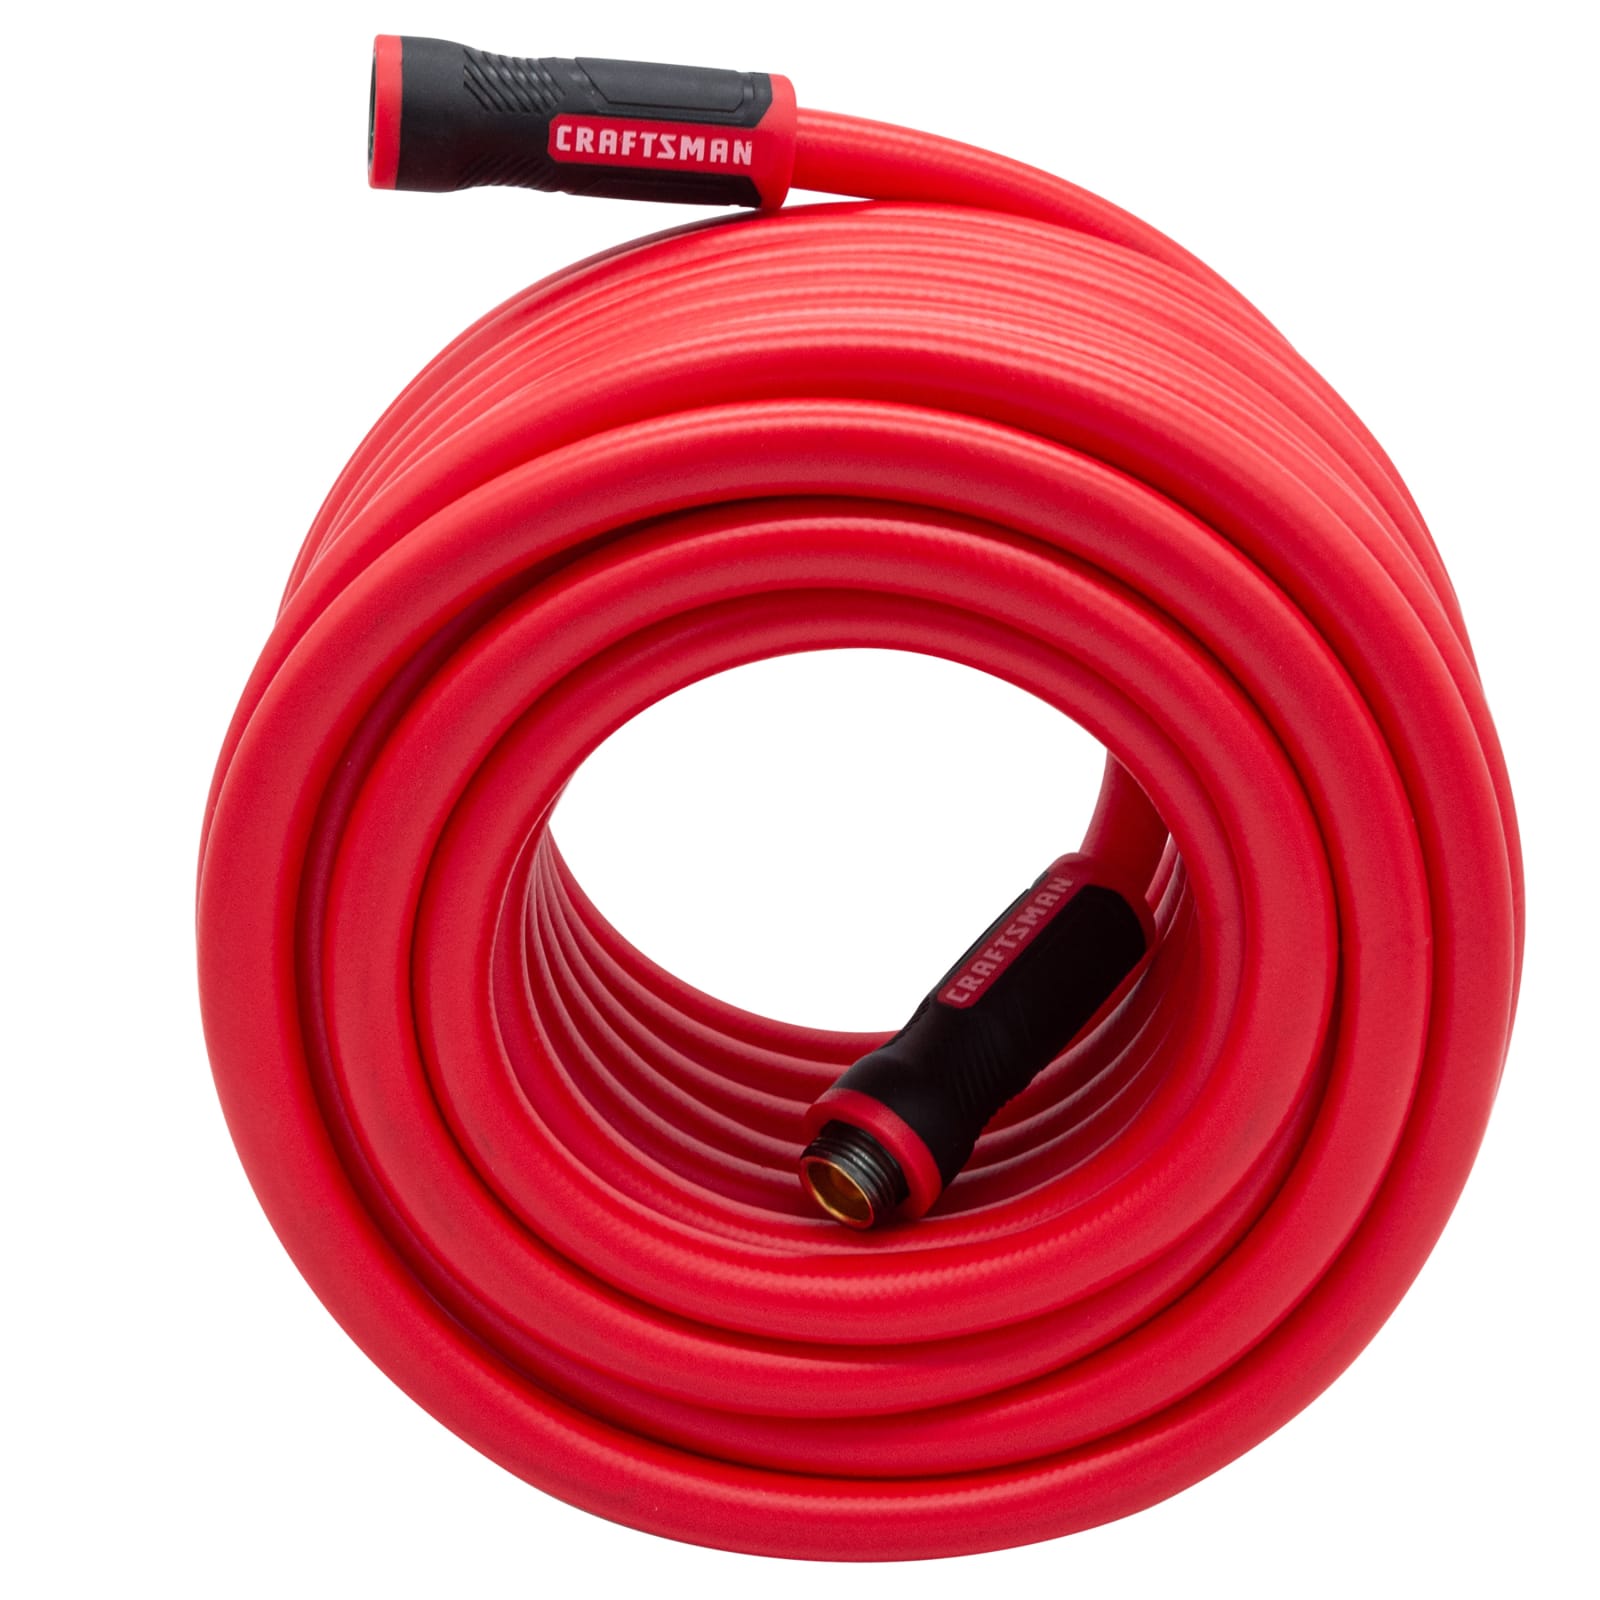 75 ft x 5/8 in Professional Grade Hot Water Hose by CRAFTSMAN at Fleet Farm